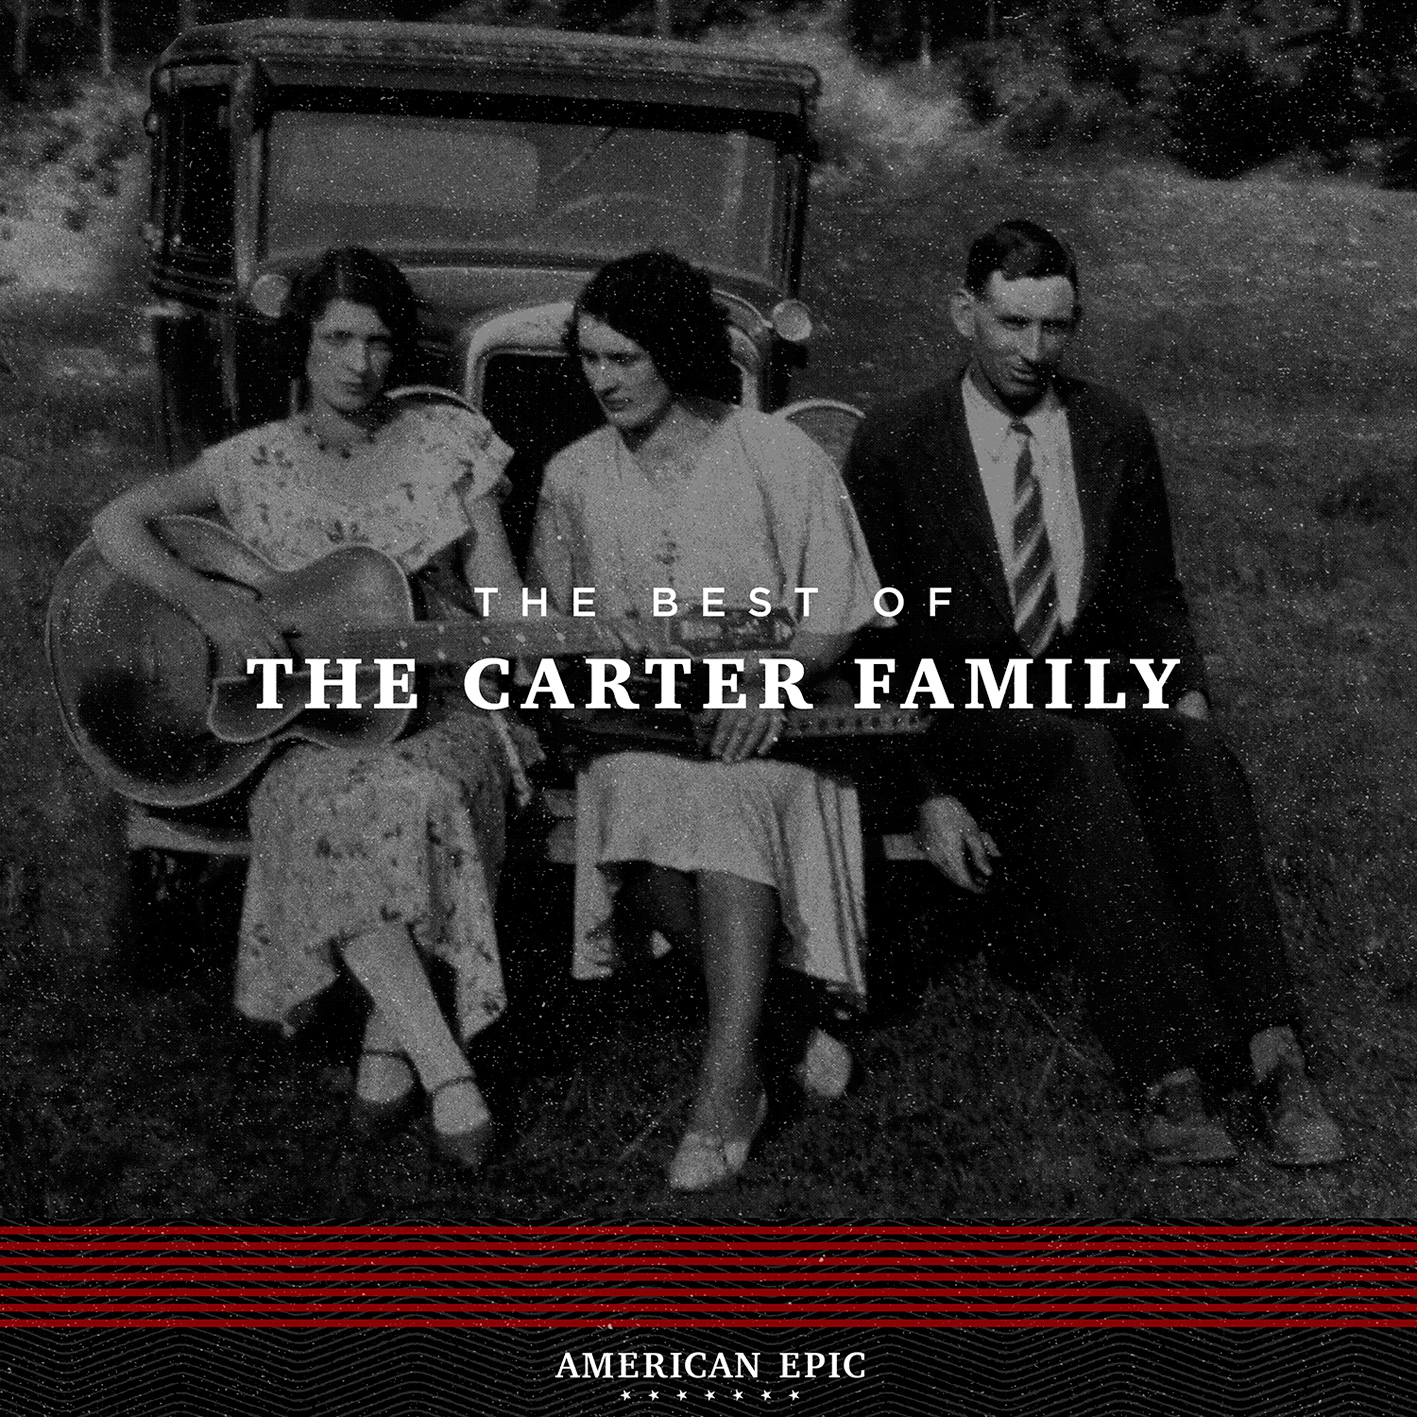 The Carter Family - American Epic: The Best Of The Carter Family (2017) [HDTracks FLAC 24bit/96kHz]